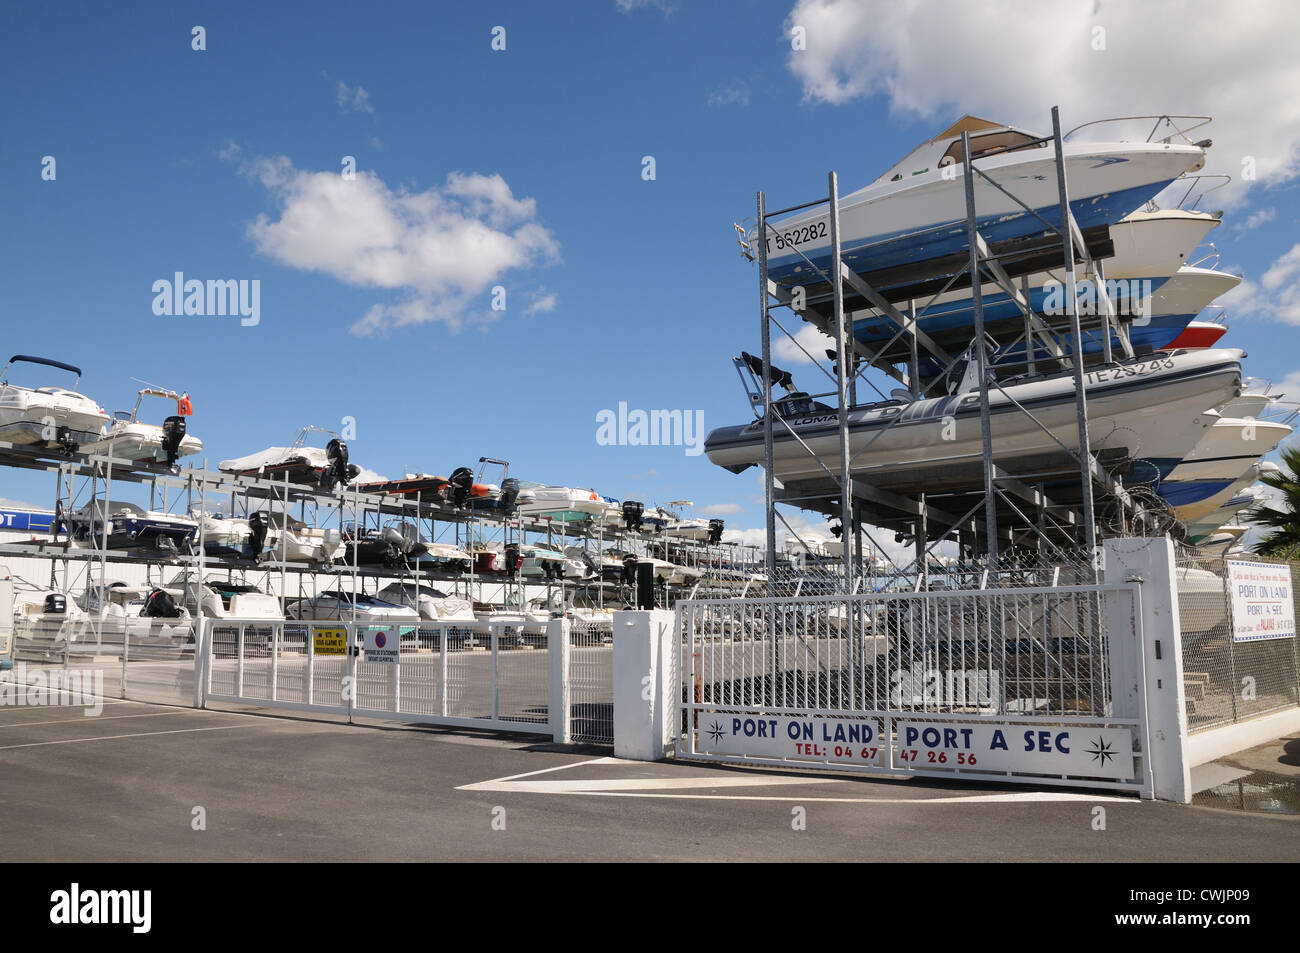 Boats stacked and stored at Port a Sec or Port on Land on the D986 Palavas  les Flots Languedoc-Roussillon France Stock Photo - Alamy